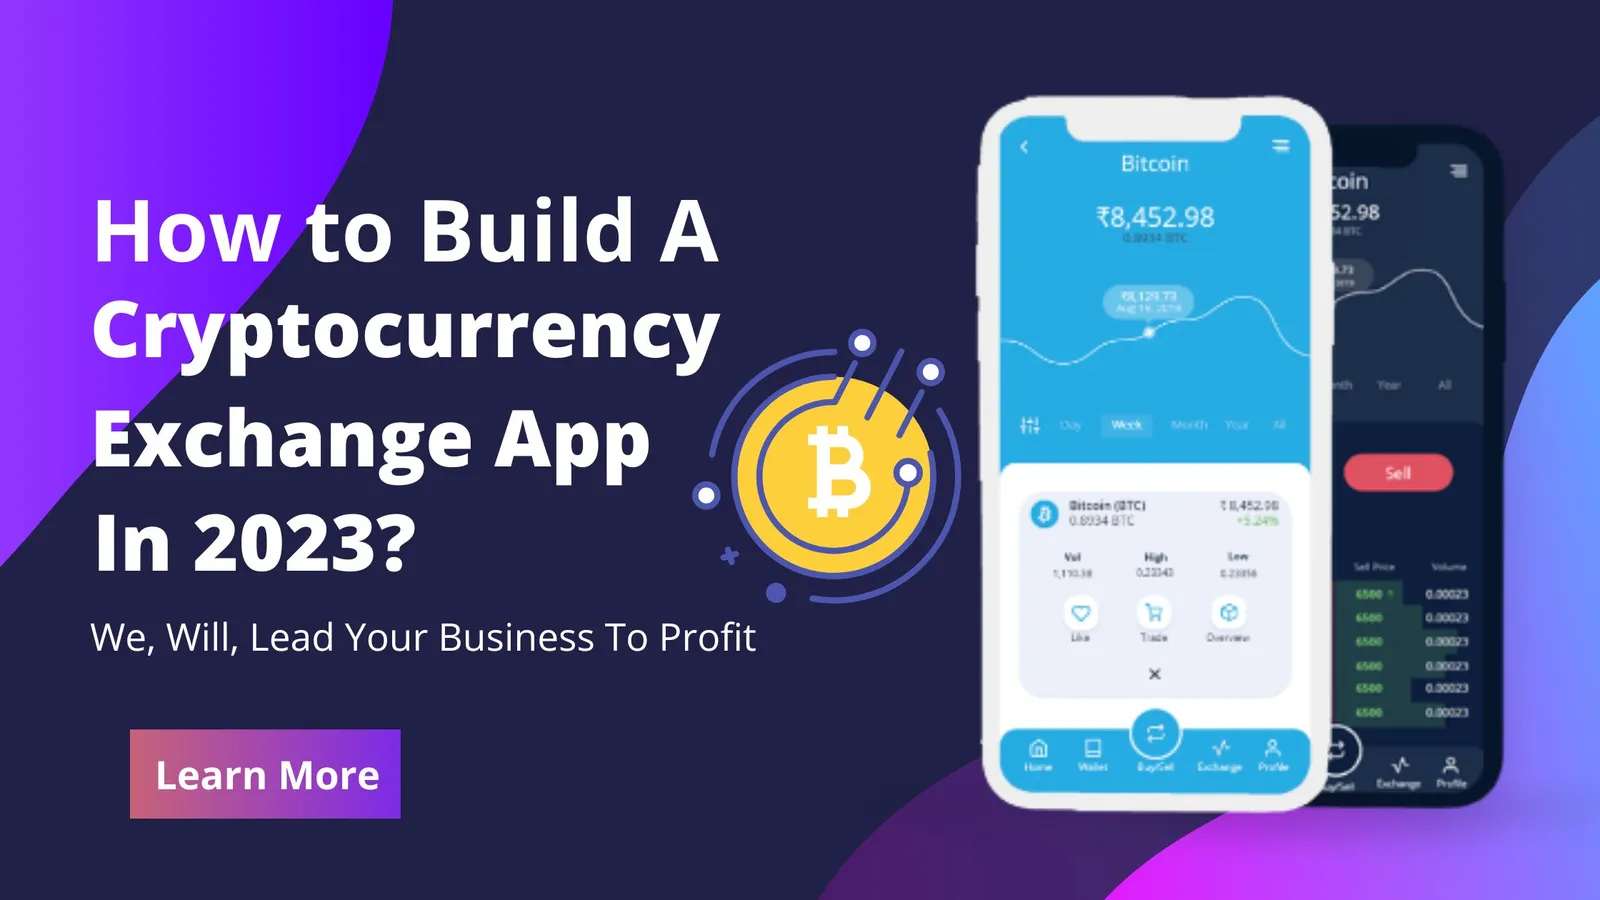 How to Build a Cryptocurrency Exchange App in 2023?